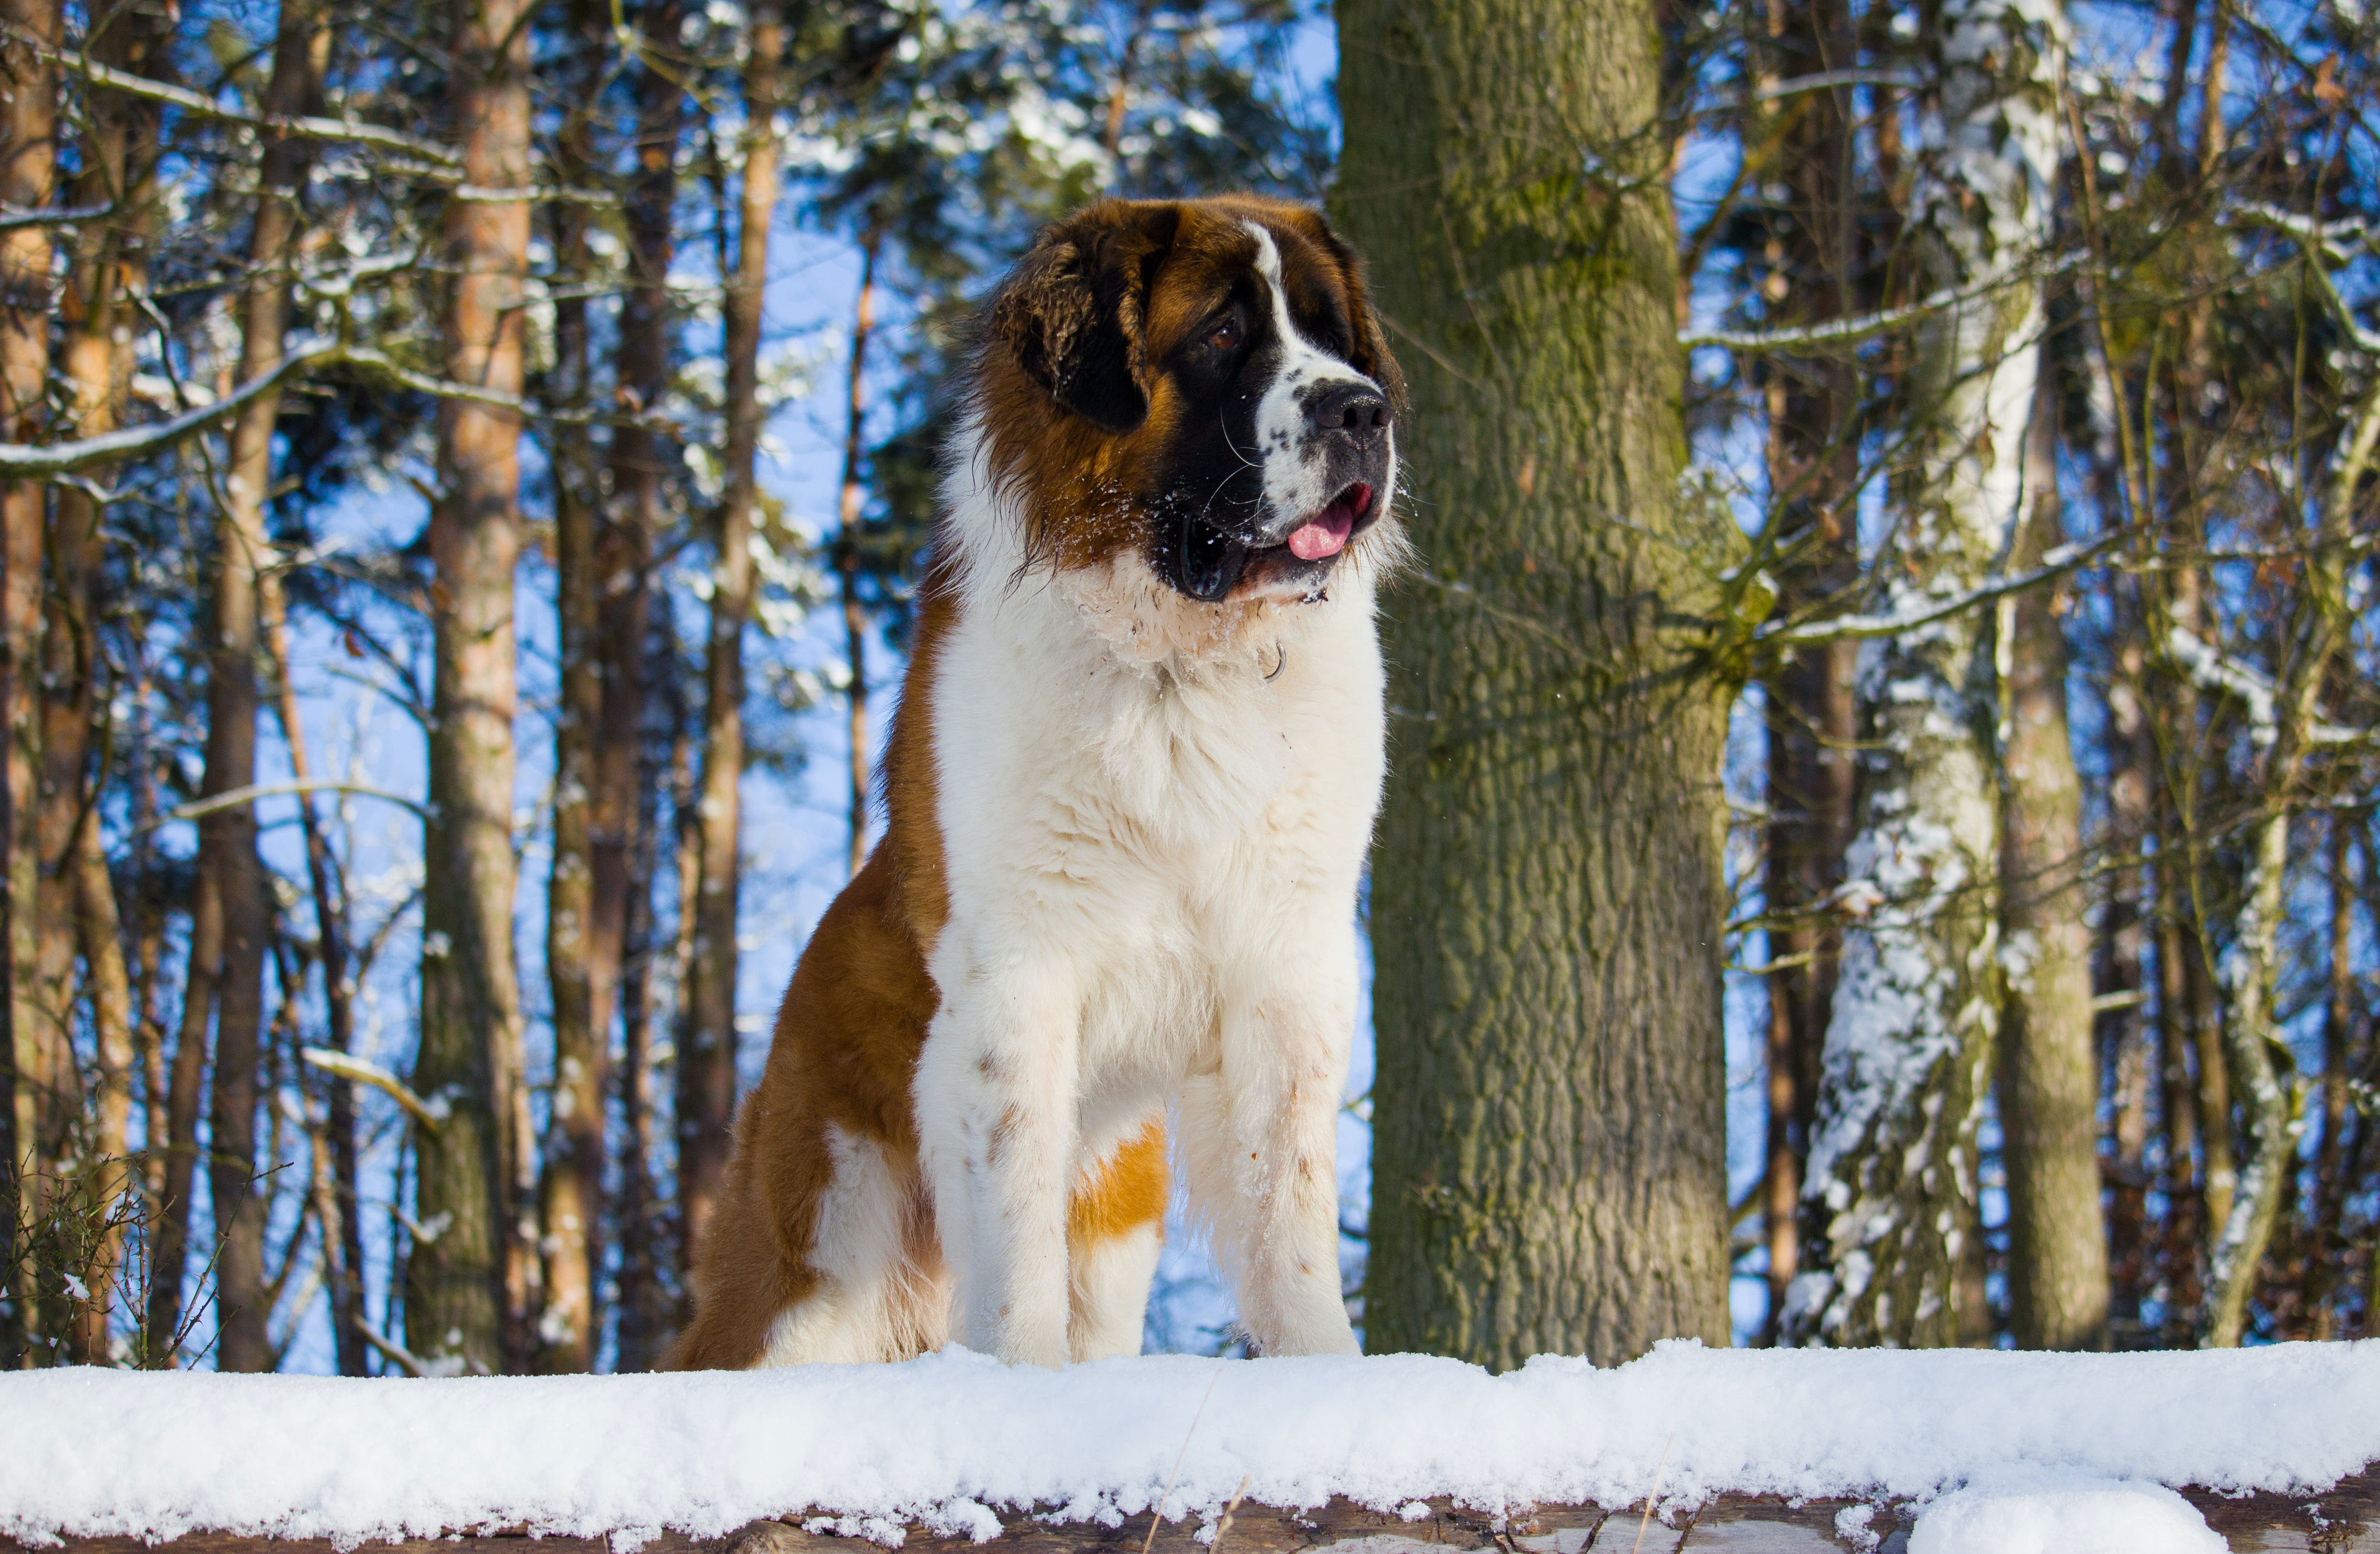 Saint Bernard in the forest looking into the distance